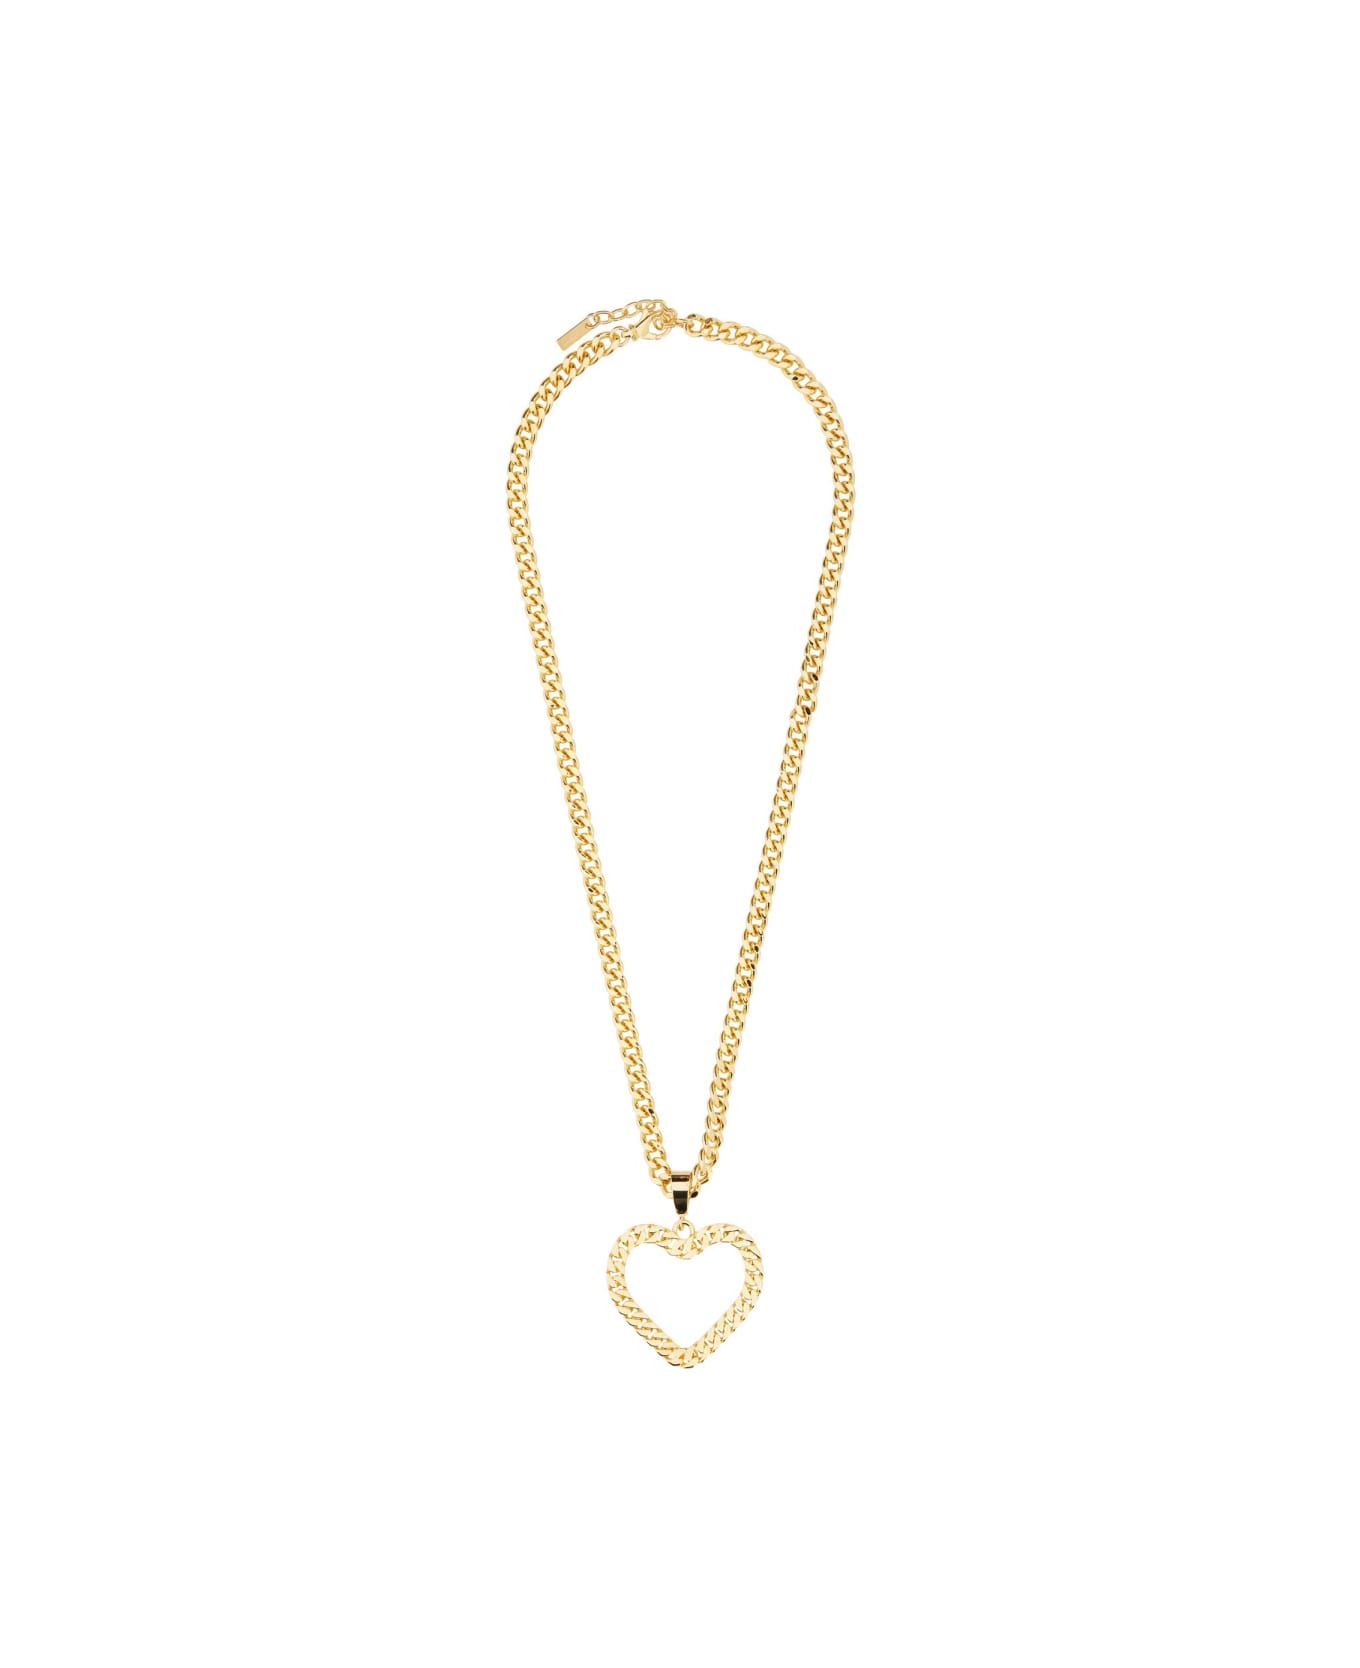 Moschino Chain Heart Necklace - GOLD ネックレス